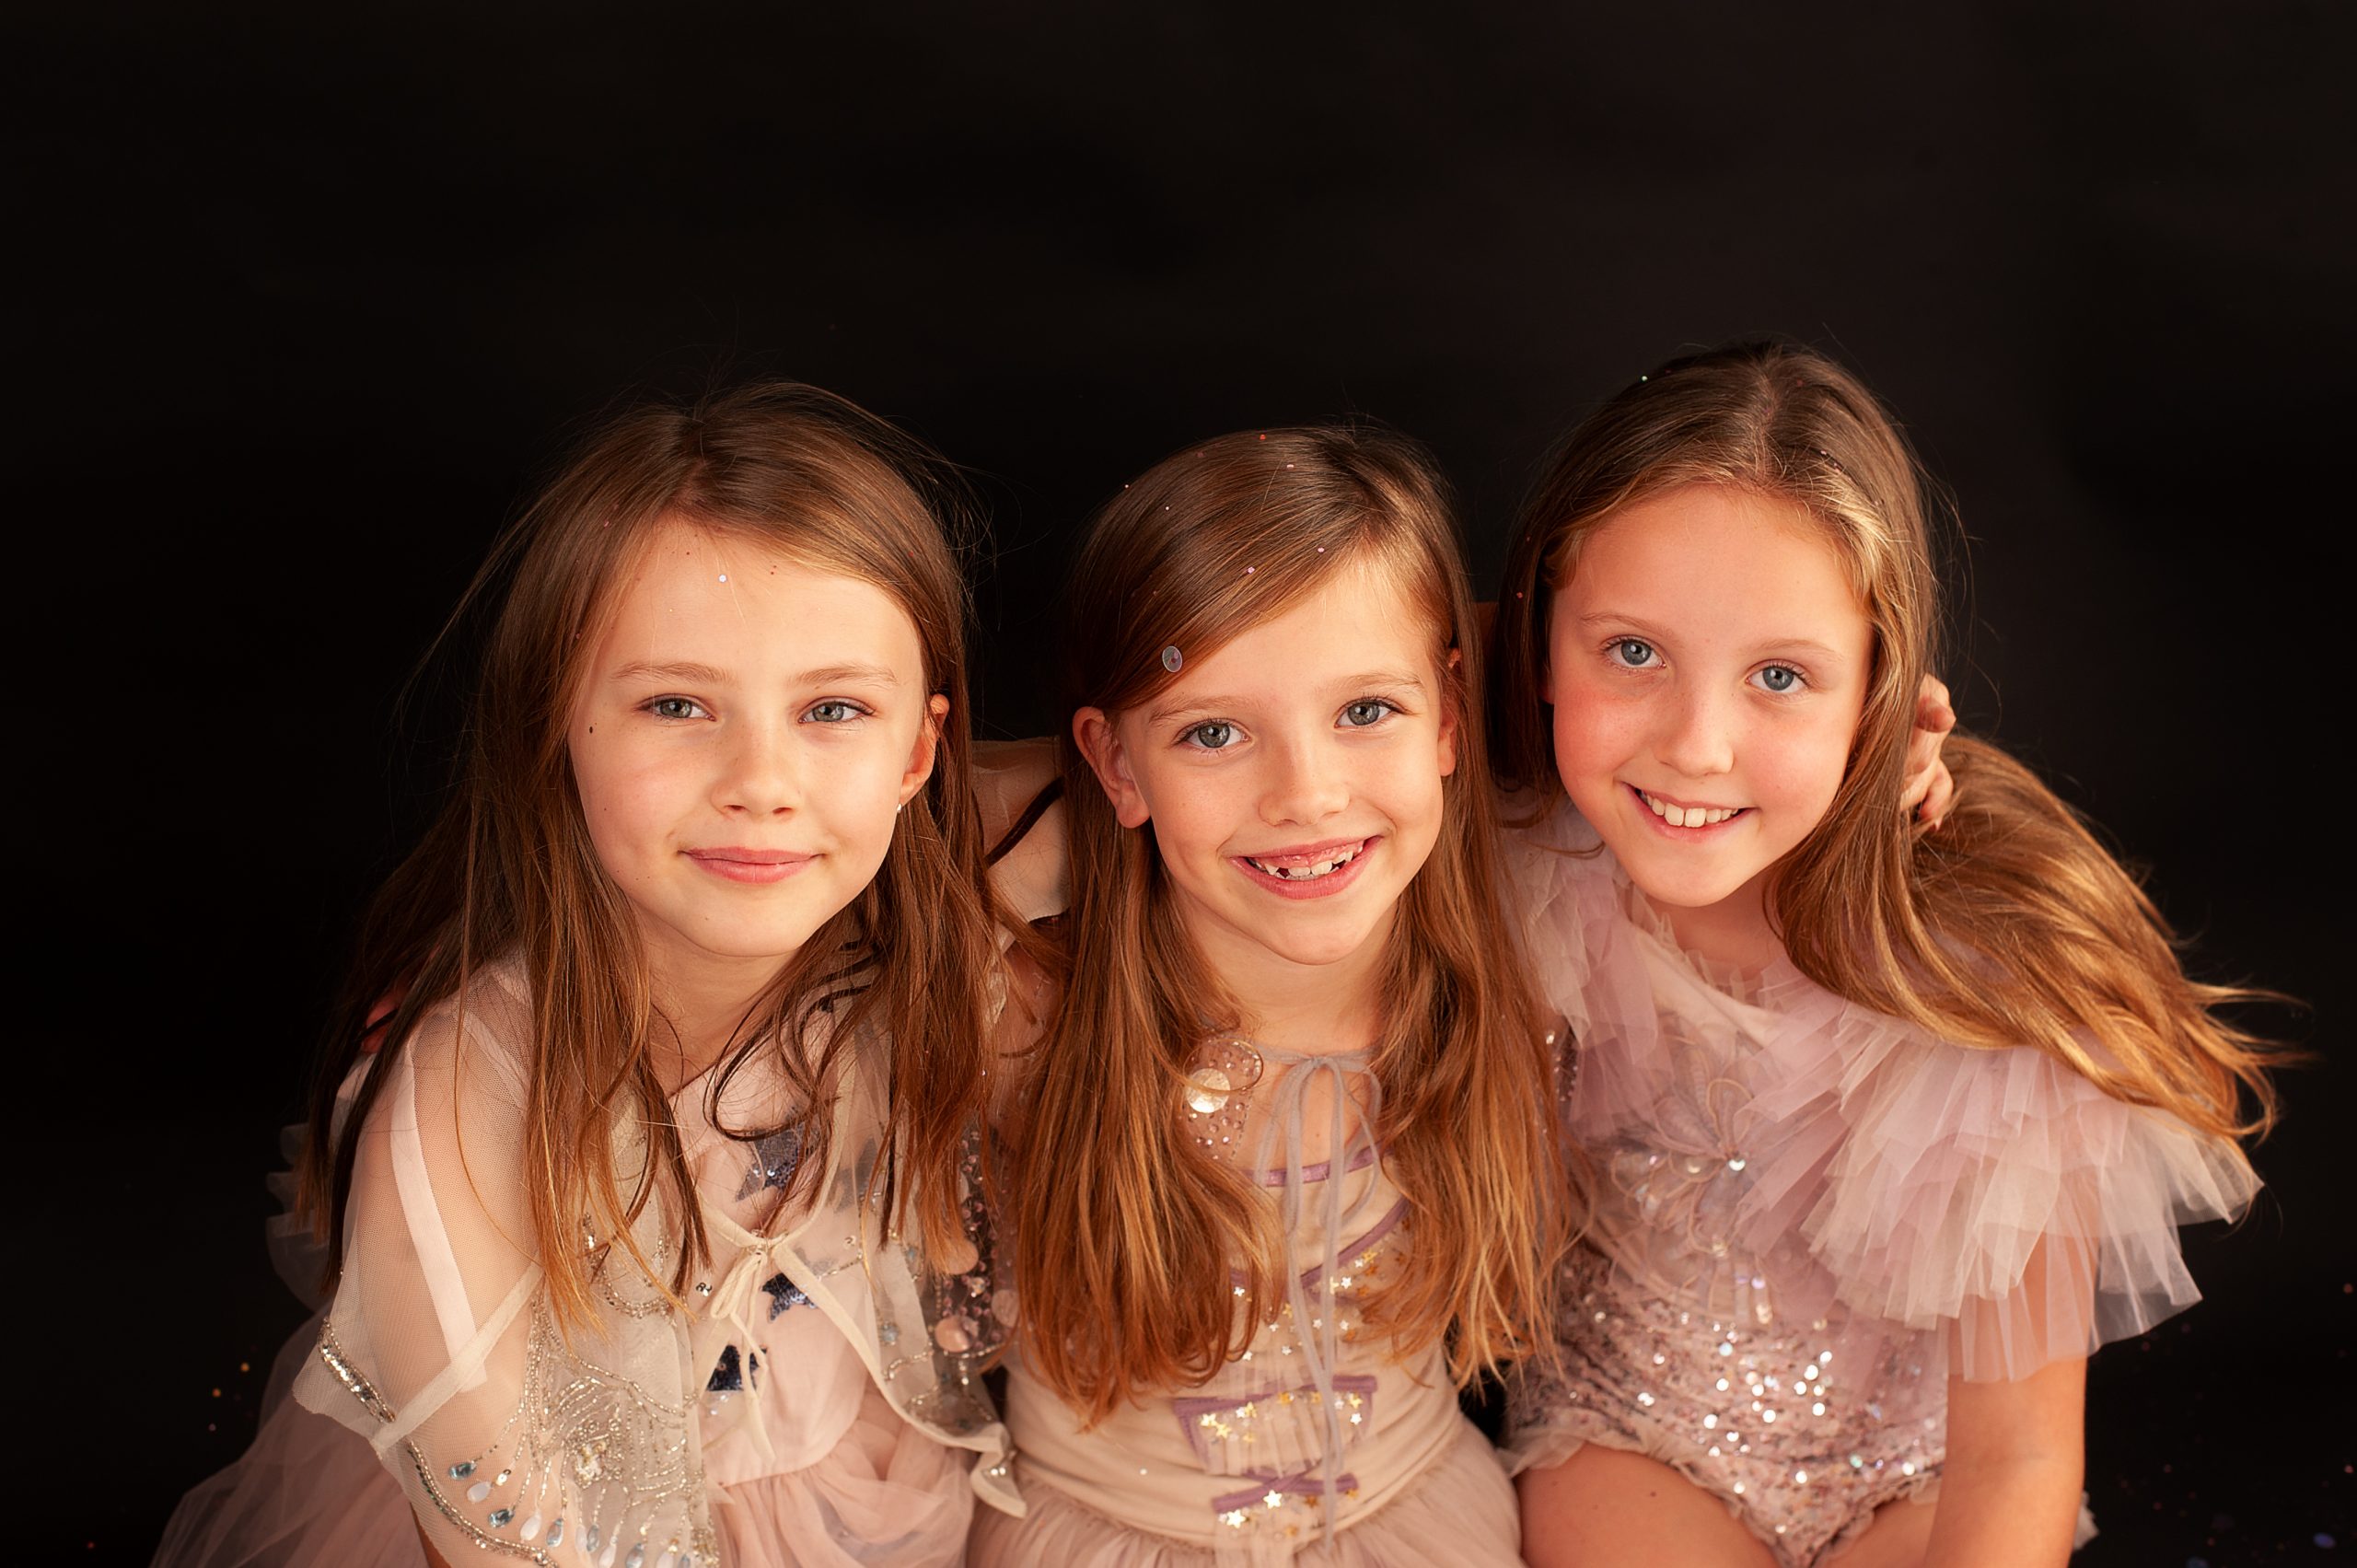 Smiling girls during a photo party